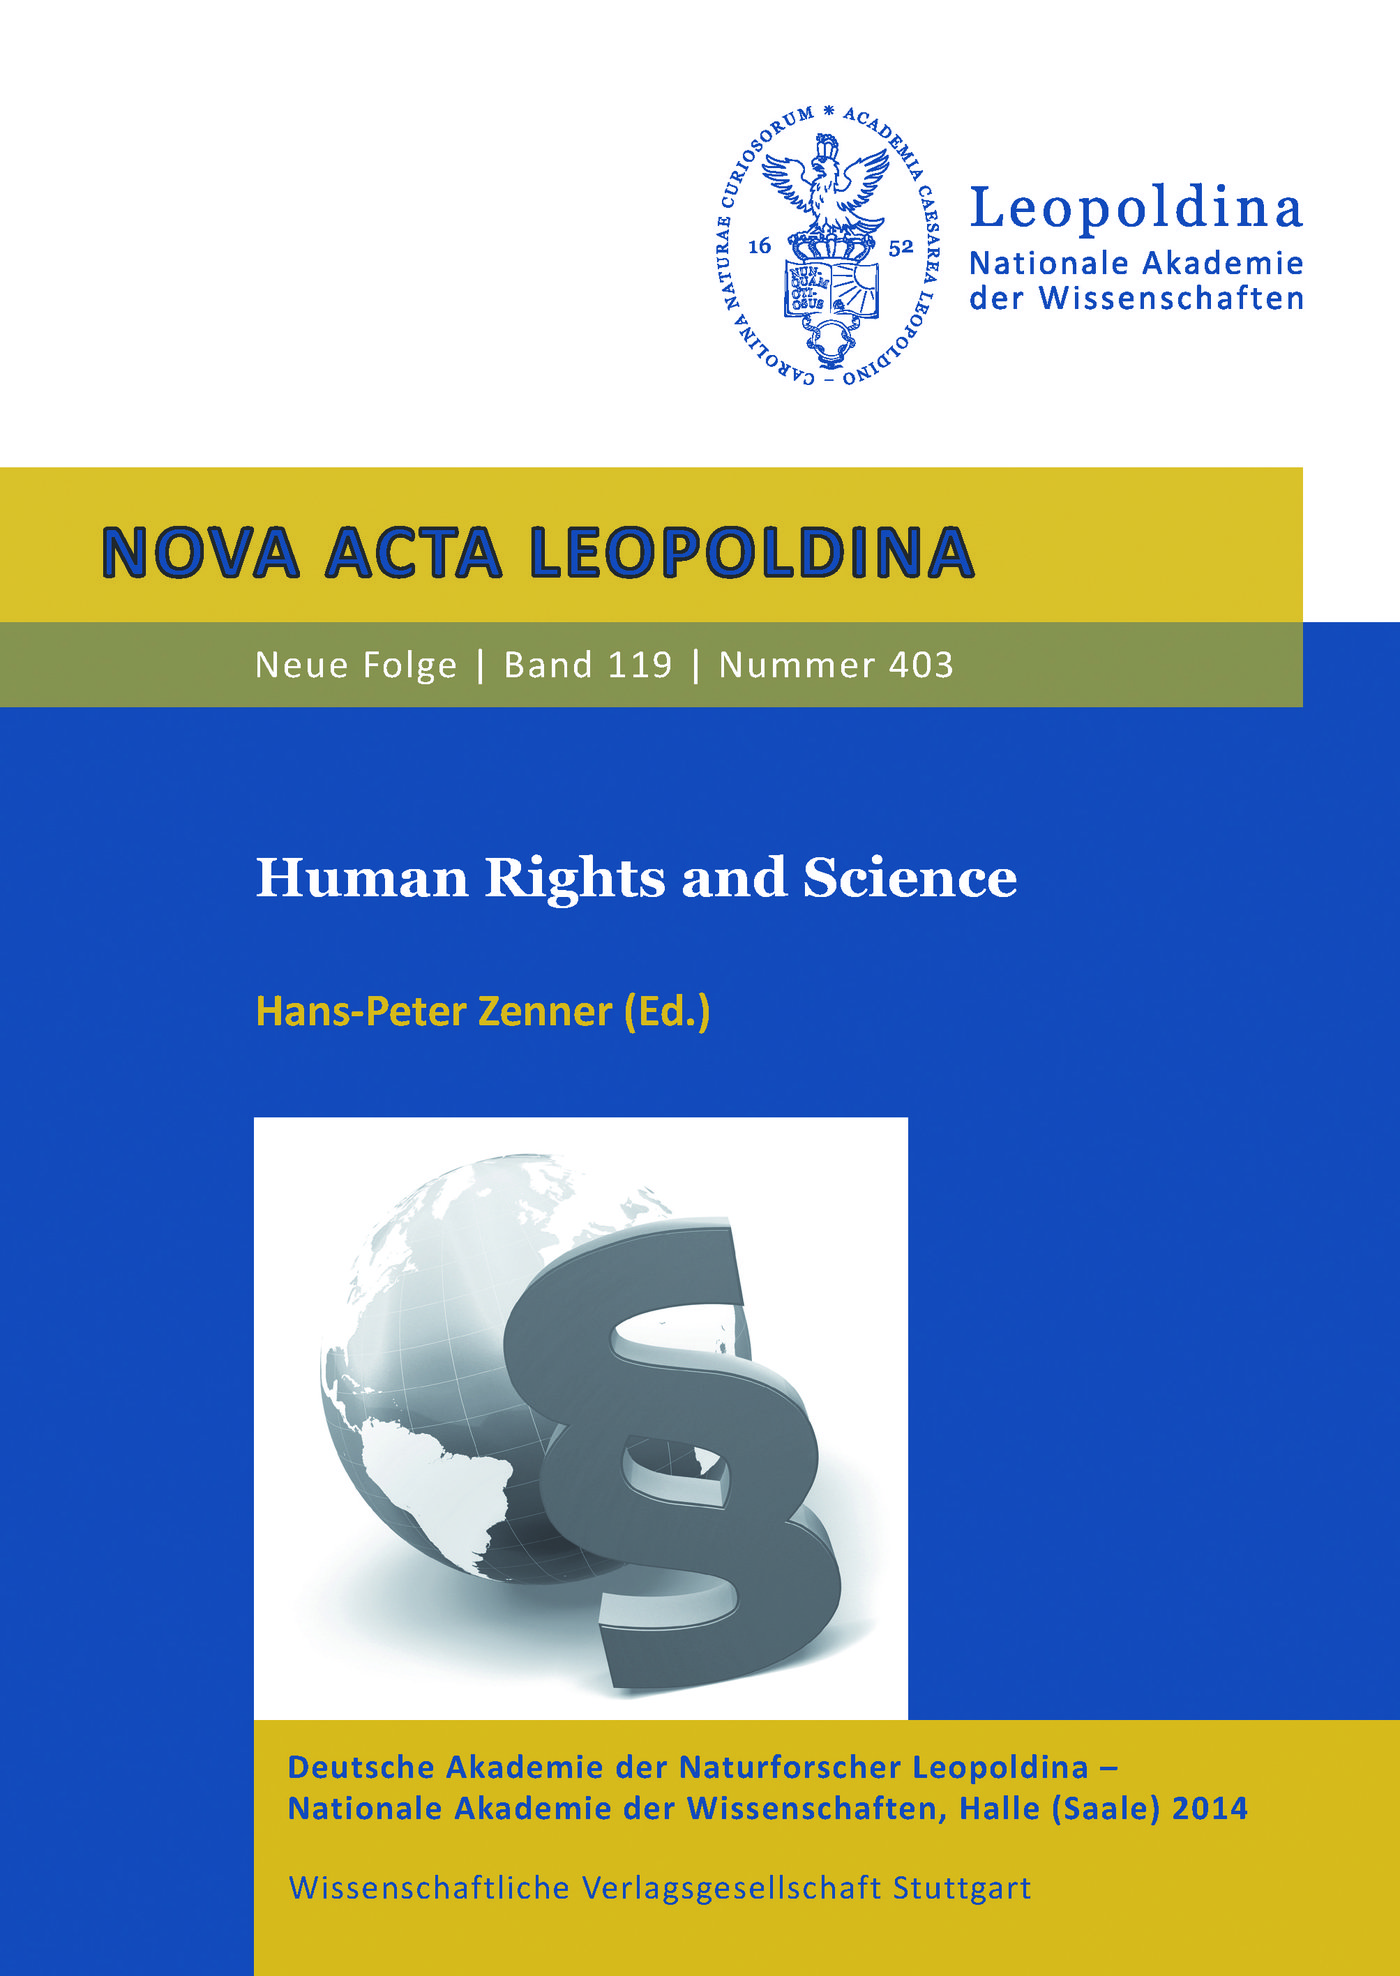 Human Rights and Science